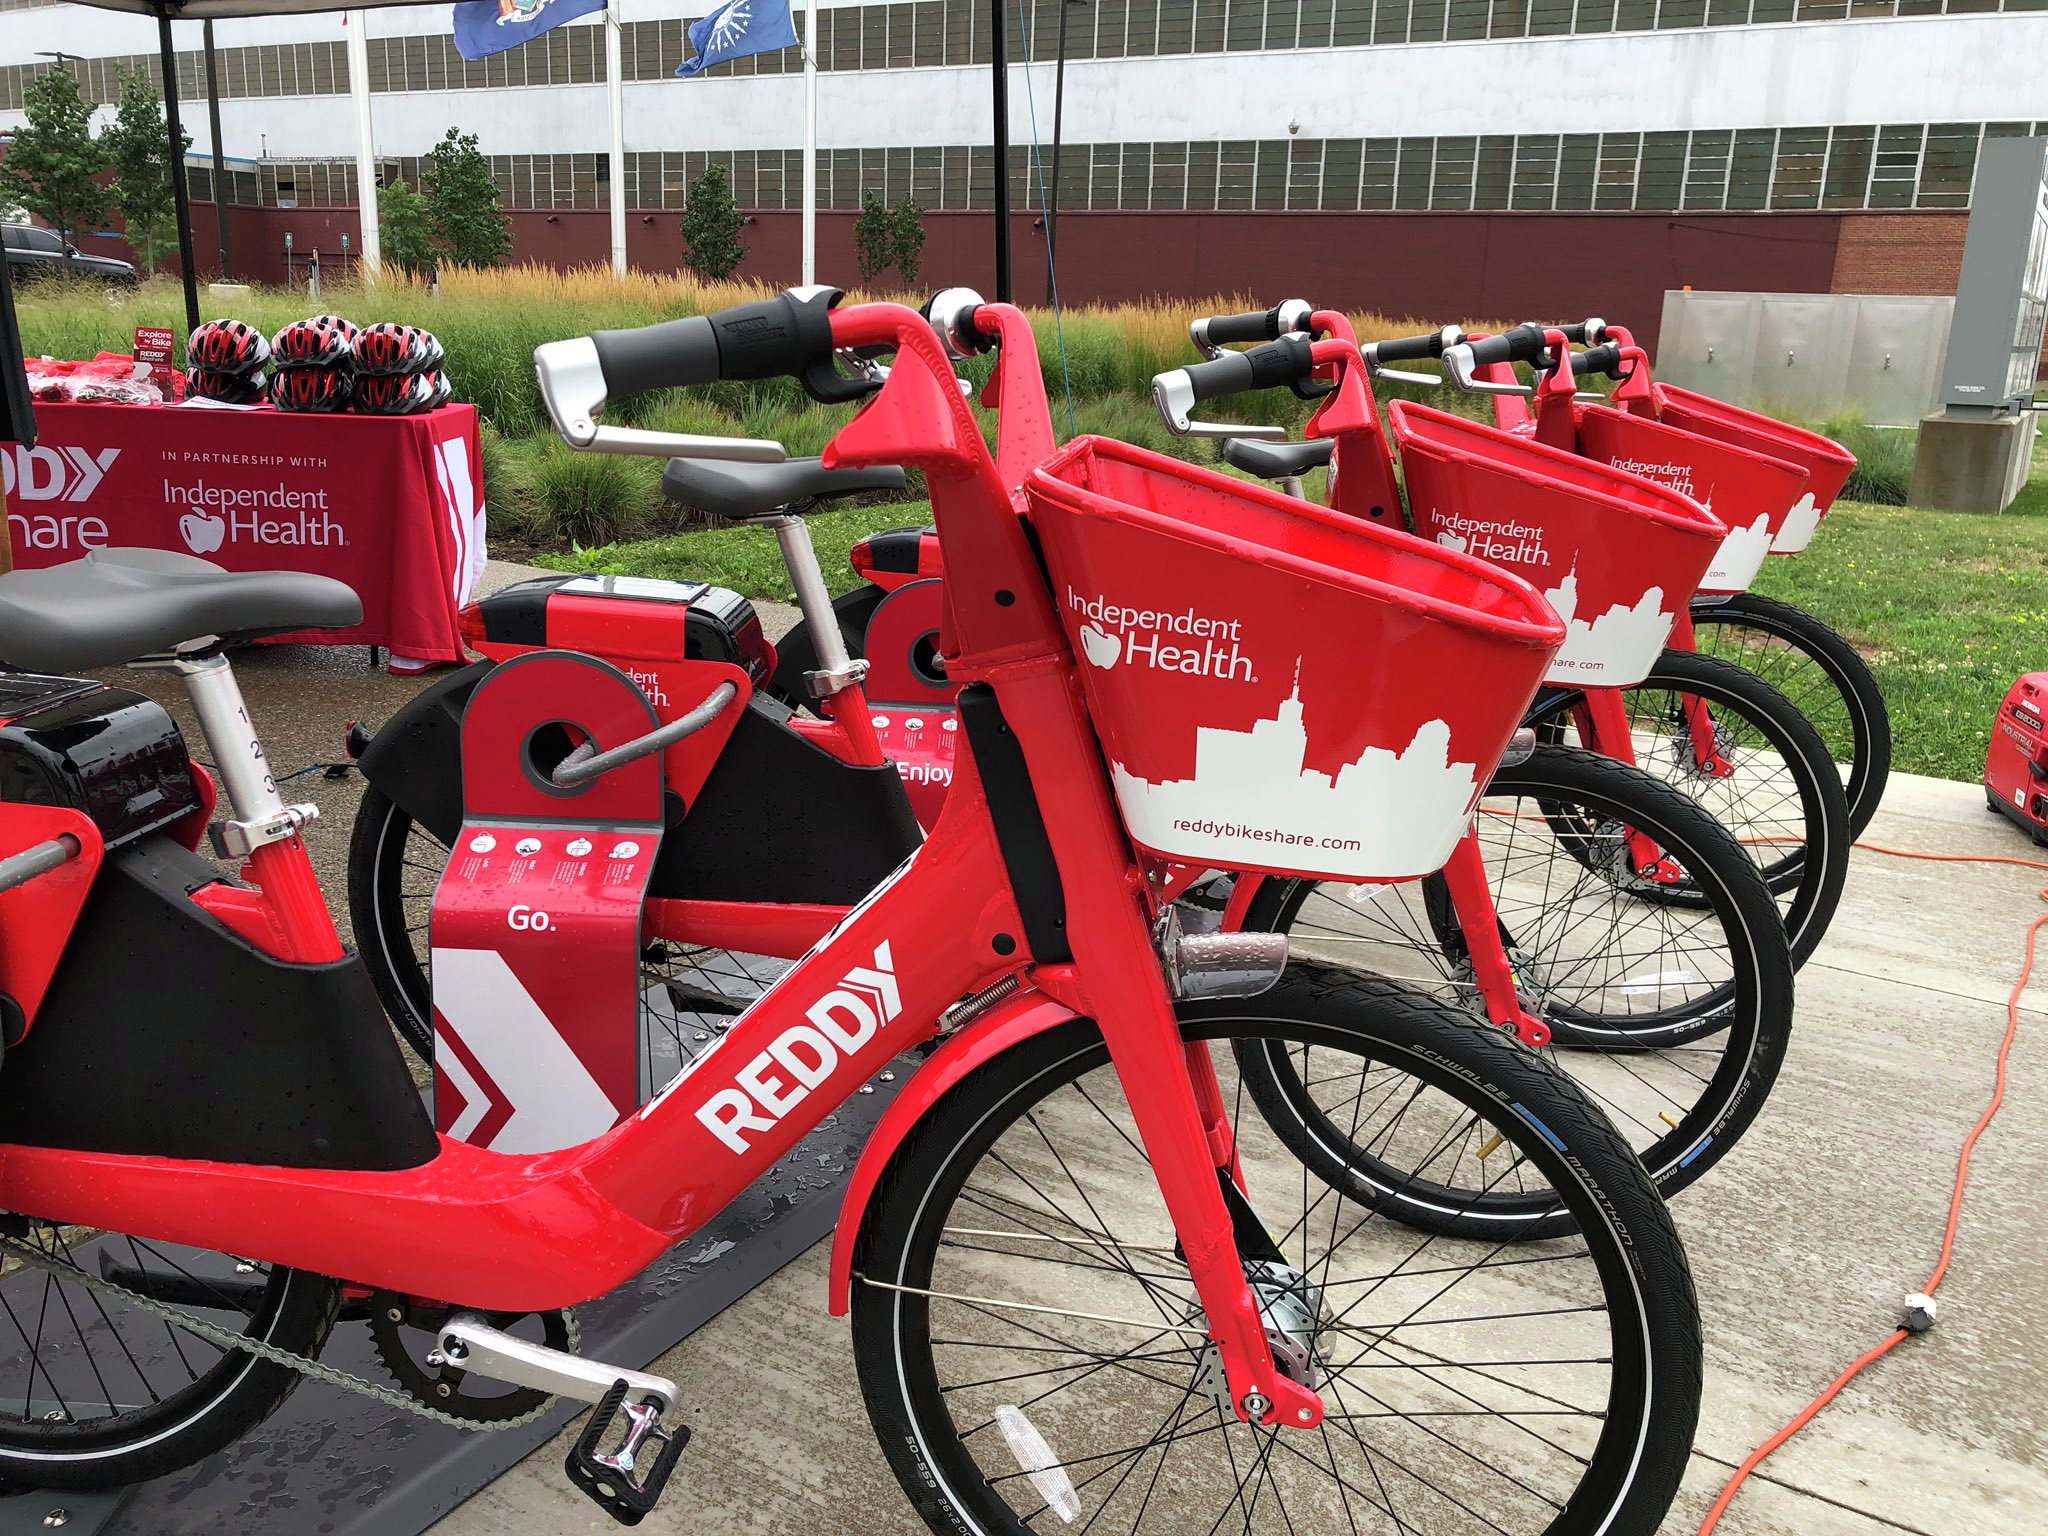 Marketing and Communications Coordinator with Reddy Bikeshare, Simon Husted on the expansion of Reddy's services to the City of Tonawanda